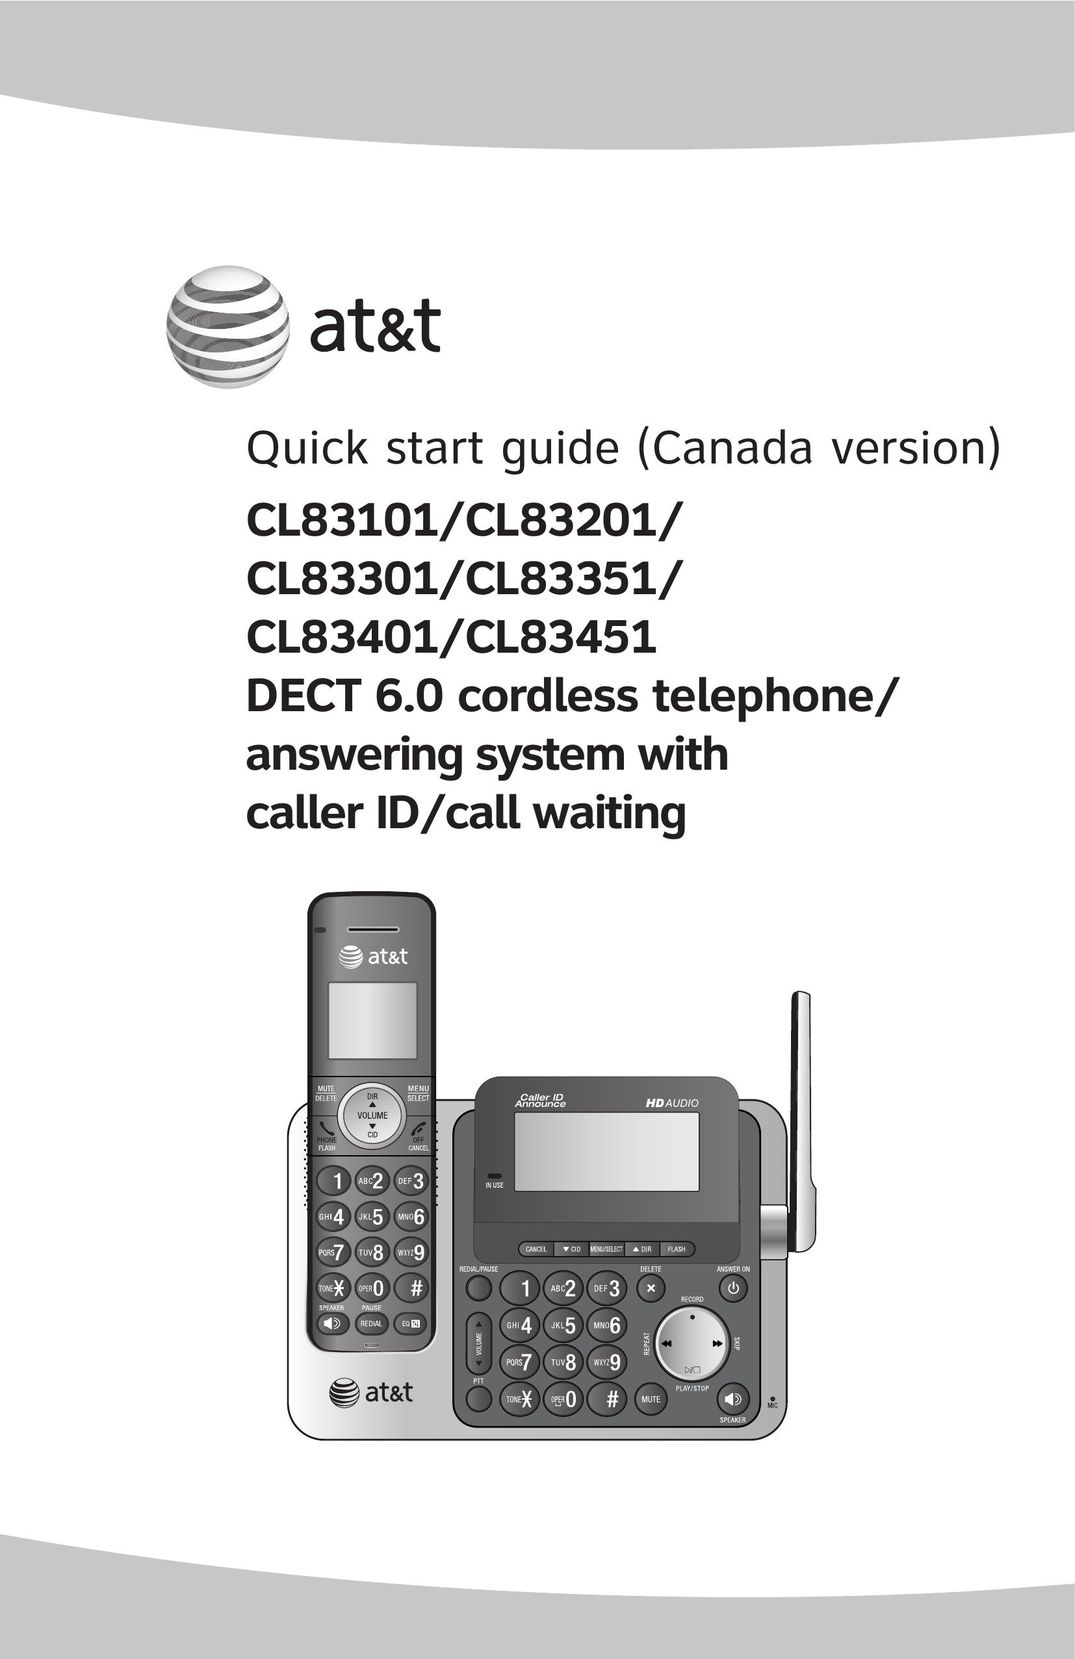 A & T International CL83351 Cordless Telephone User Manual (Page 1)